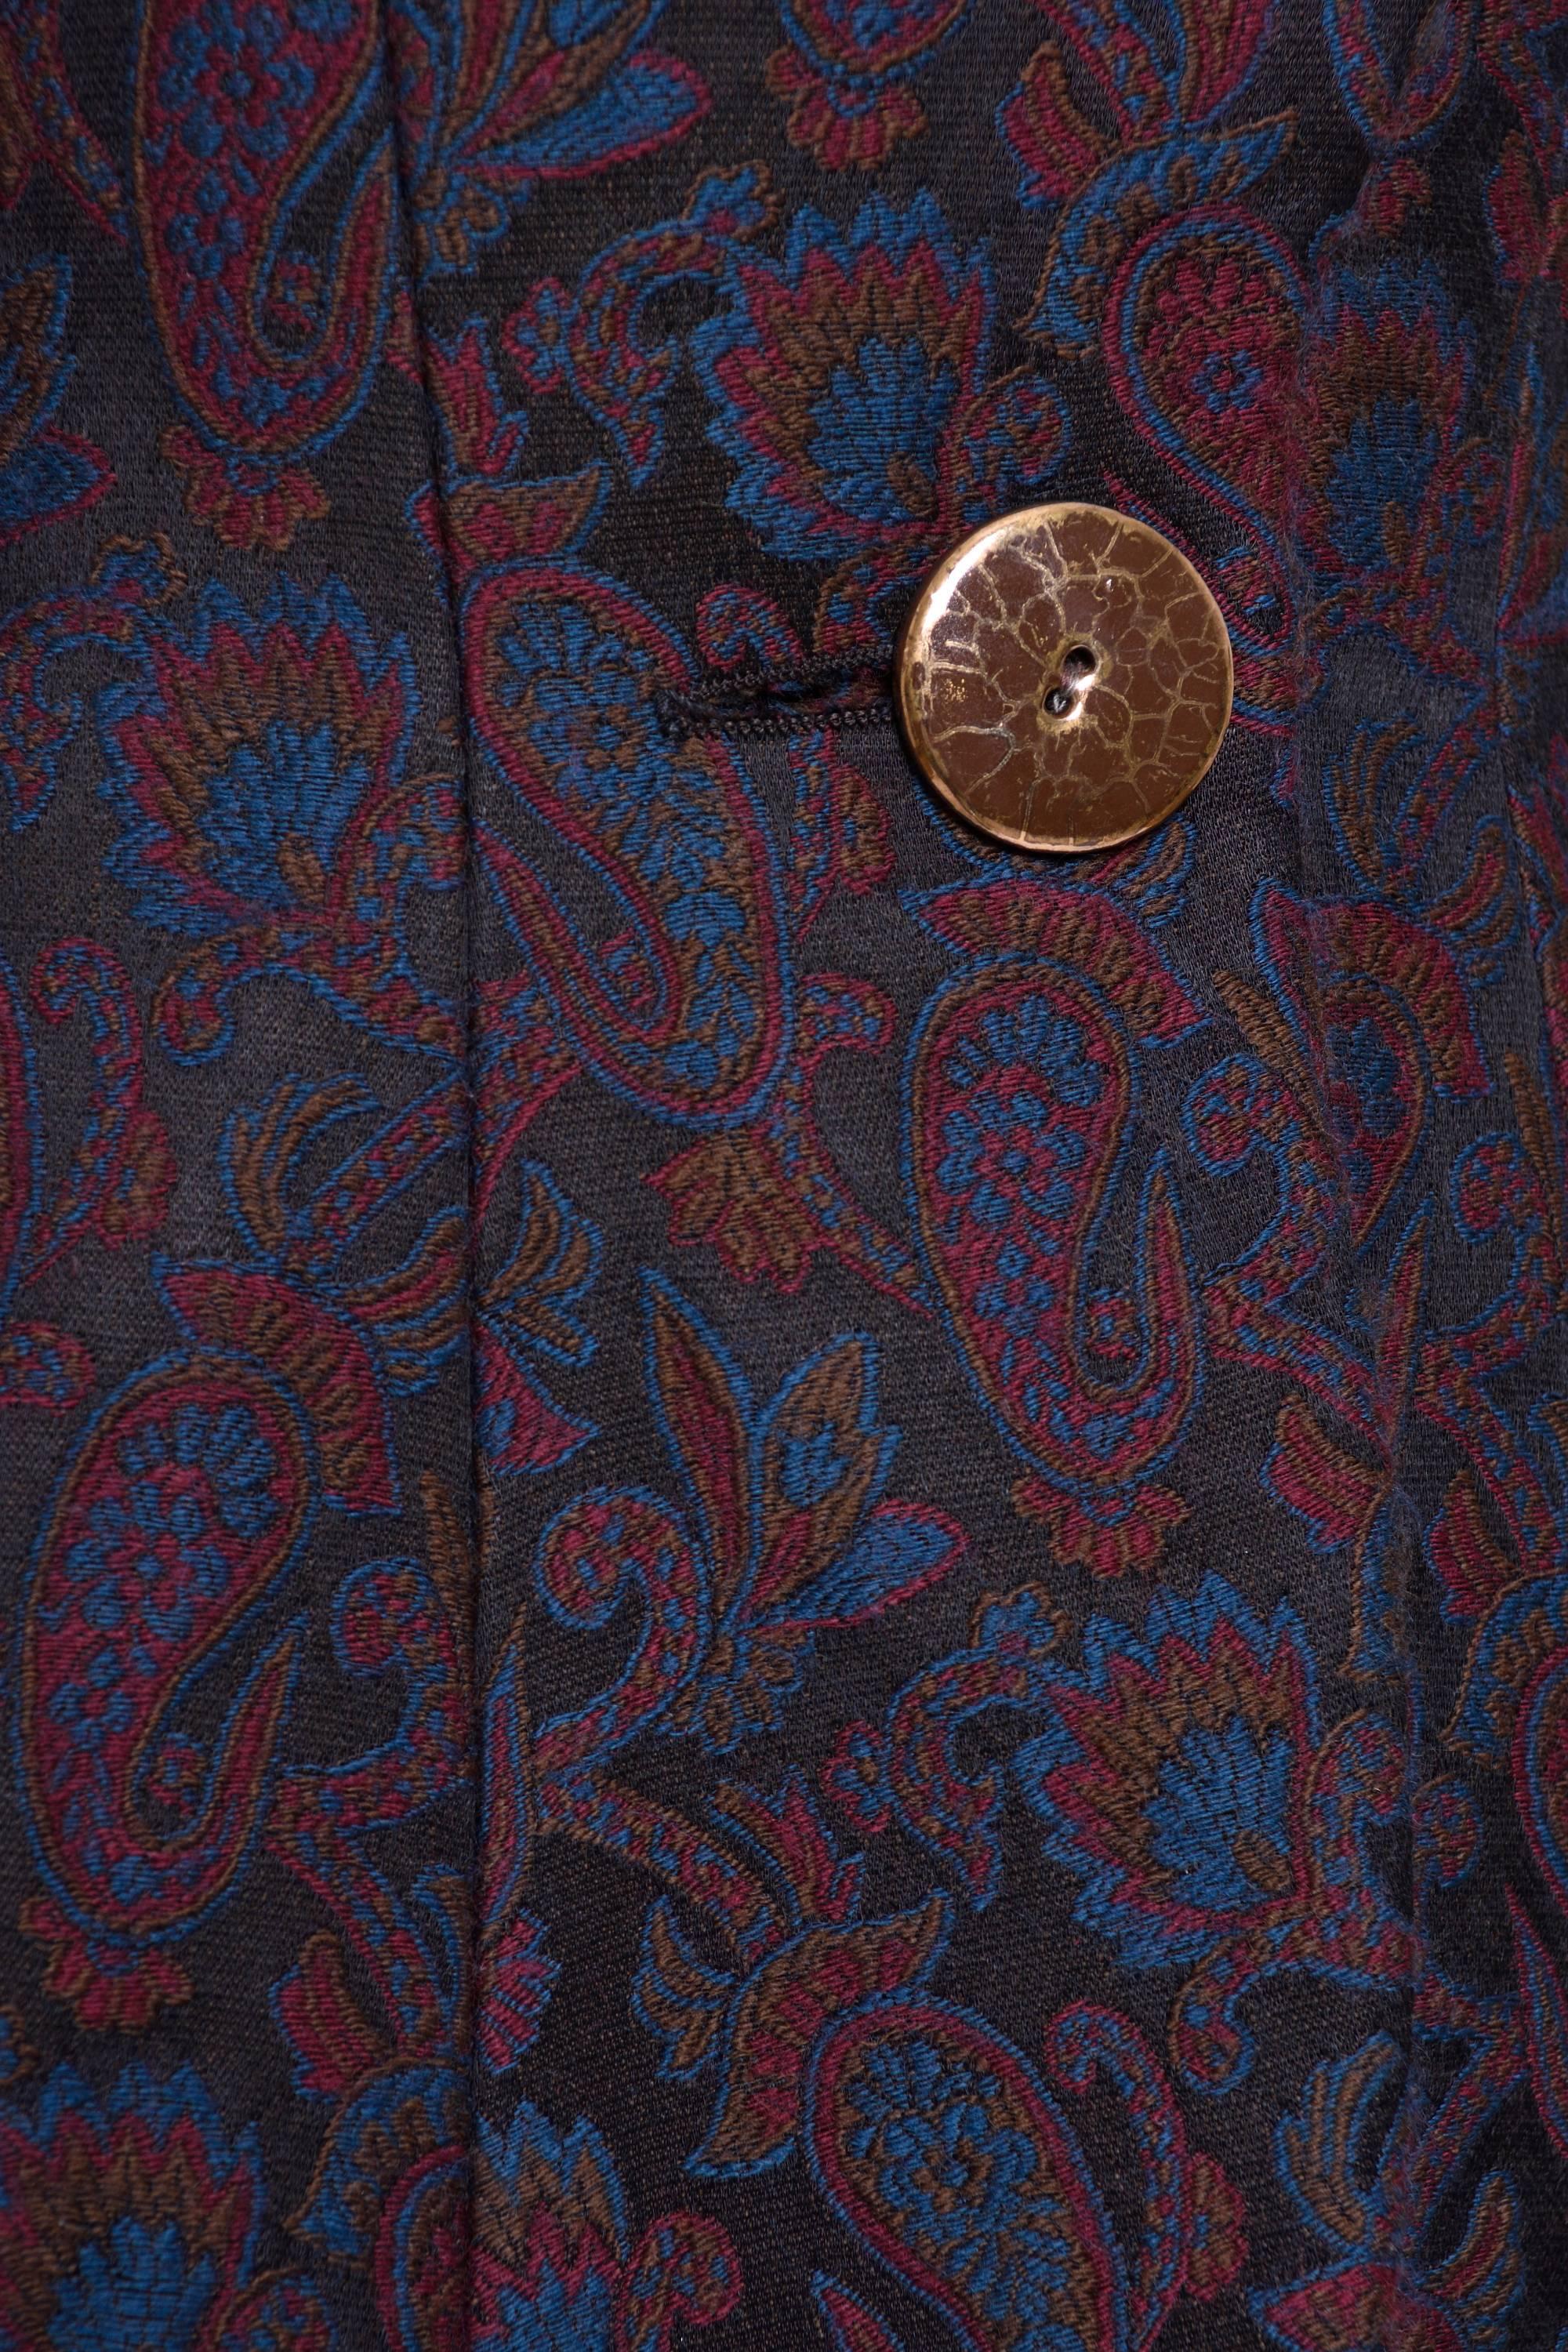 1980s Saint Laurent Rive Gauche Brocade Paisley Print Suit Pants In Excellent Condition For Sale In Milan, Italy